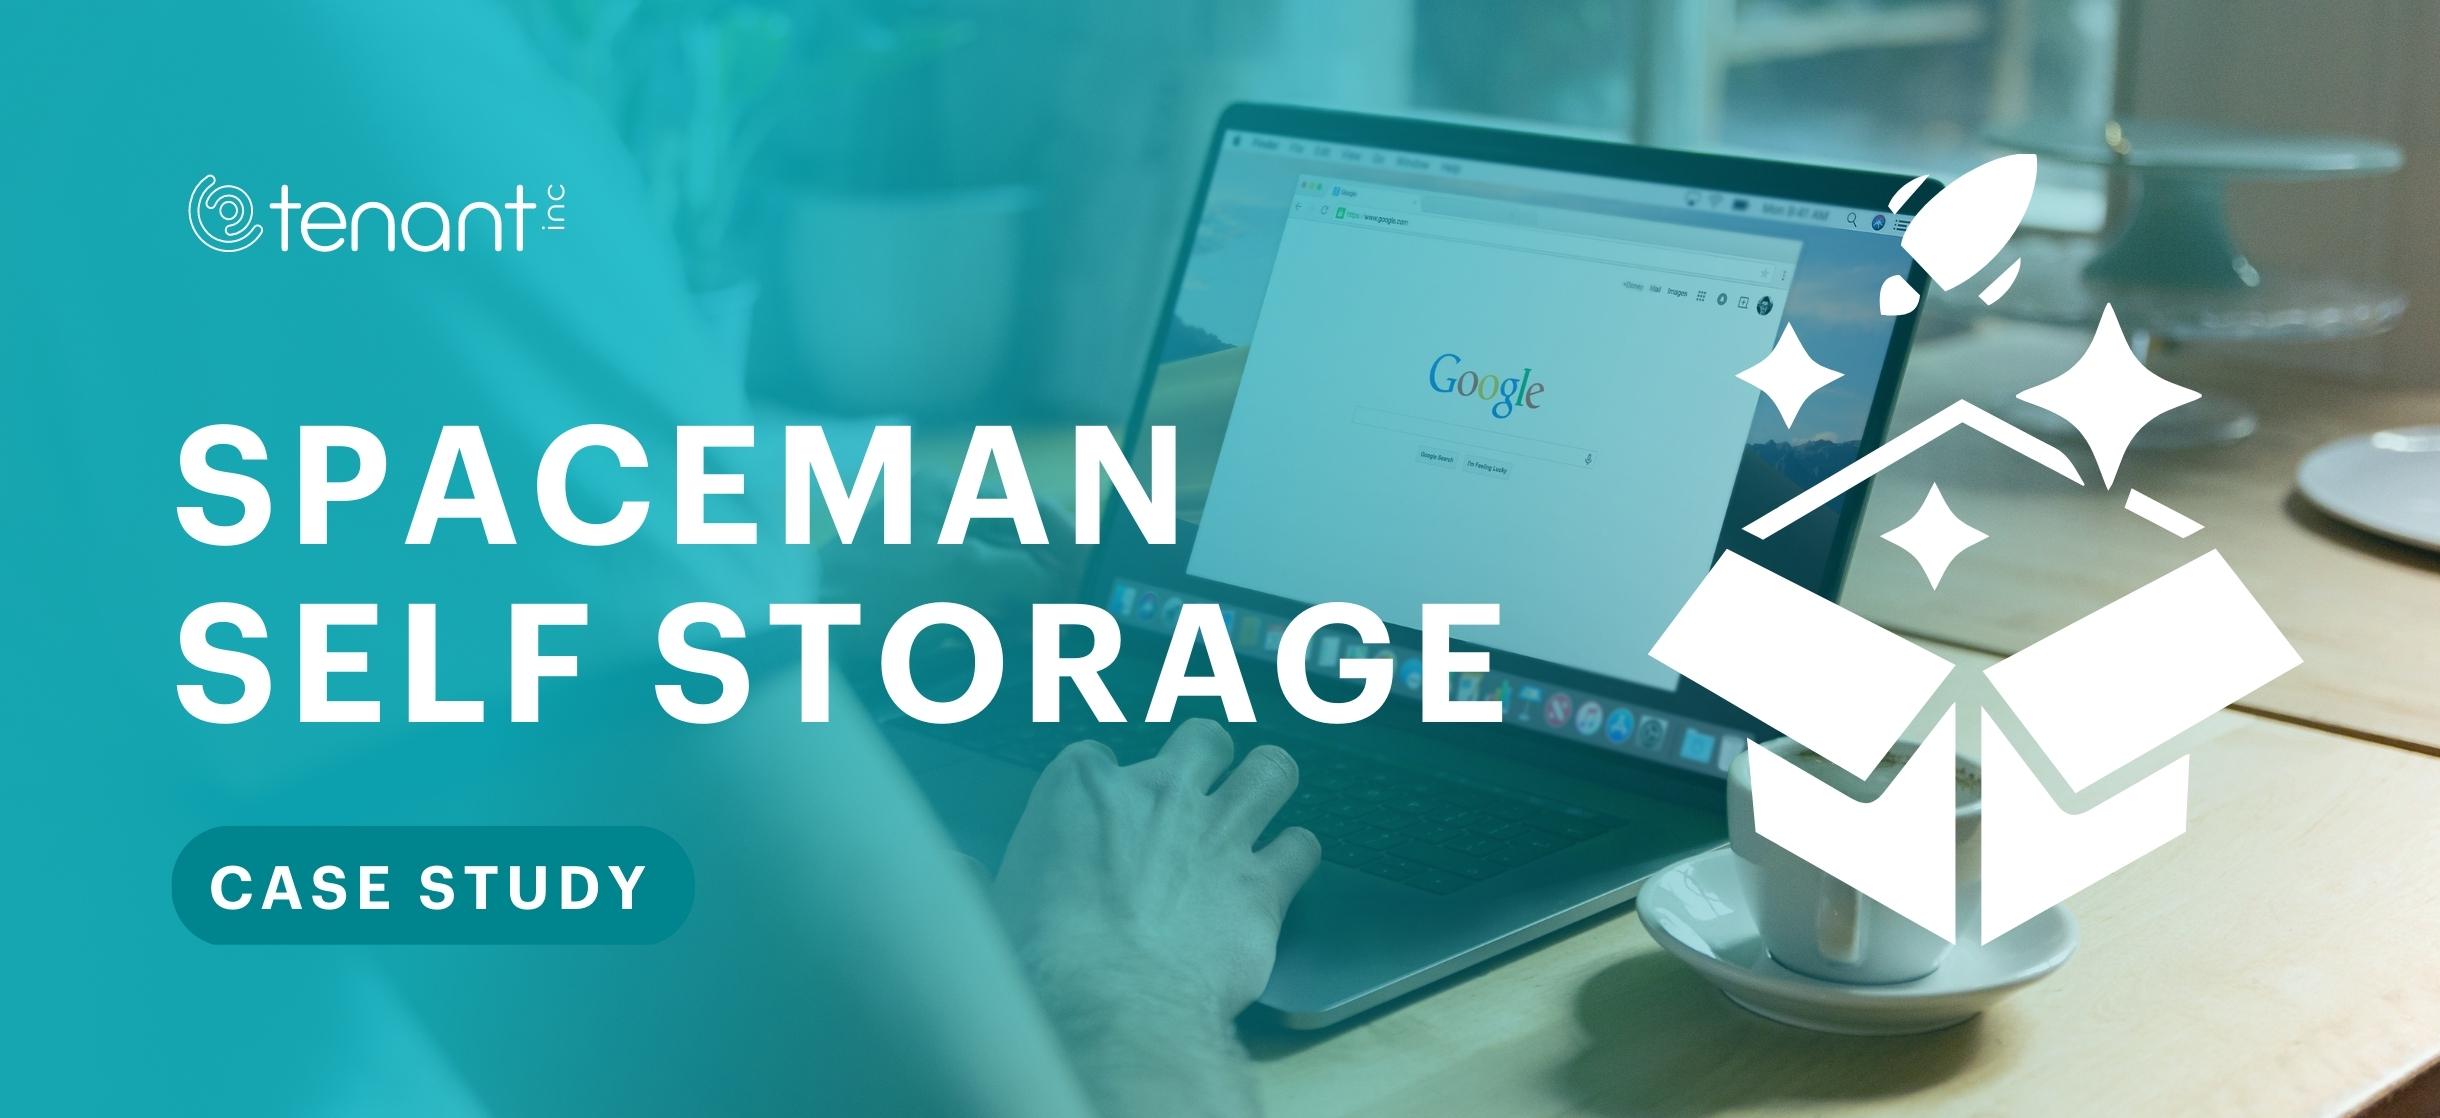 Case Study - Spaceman Self Storage - Stretched Rectangle